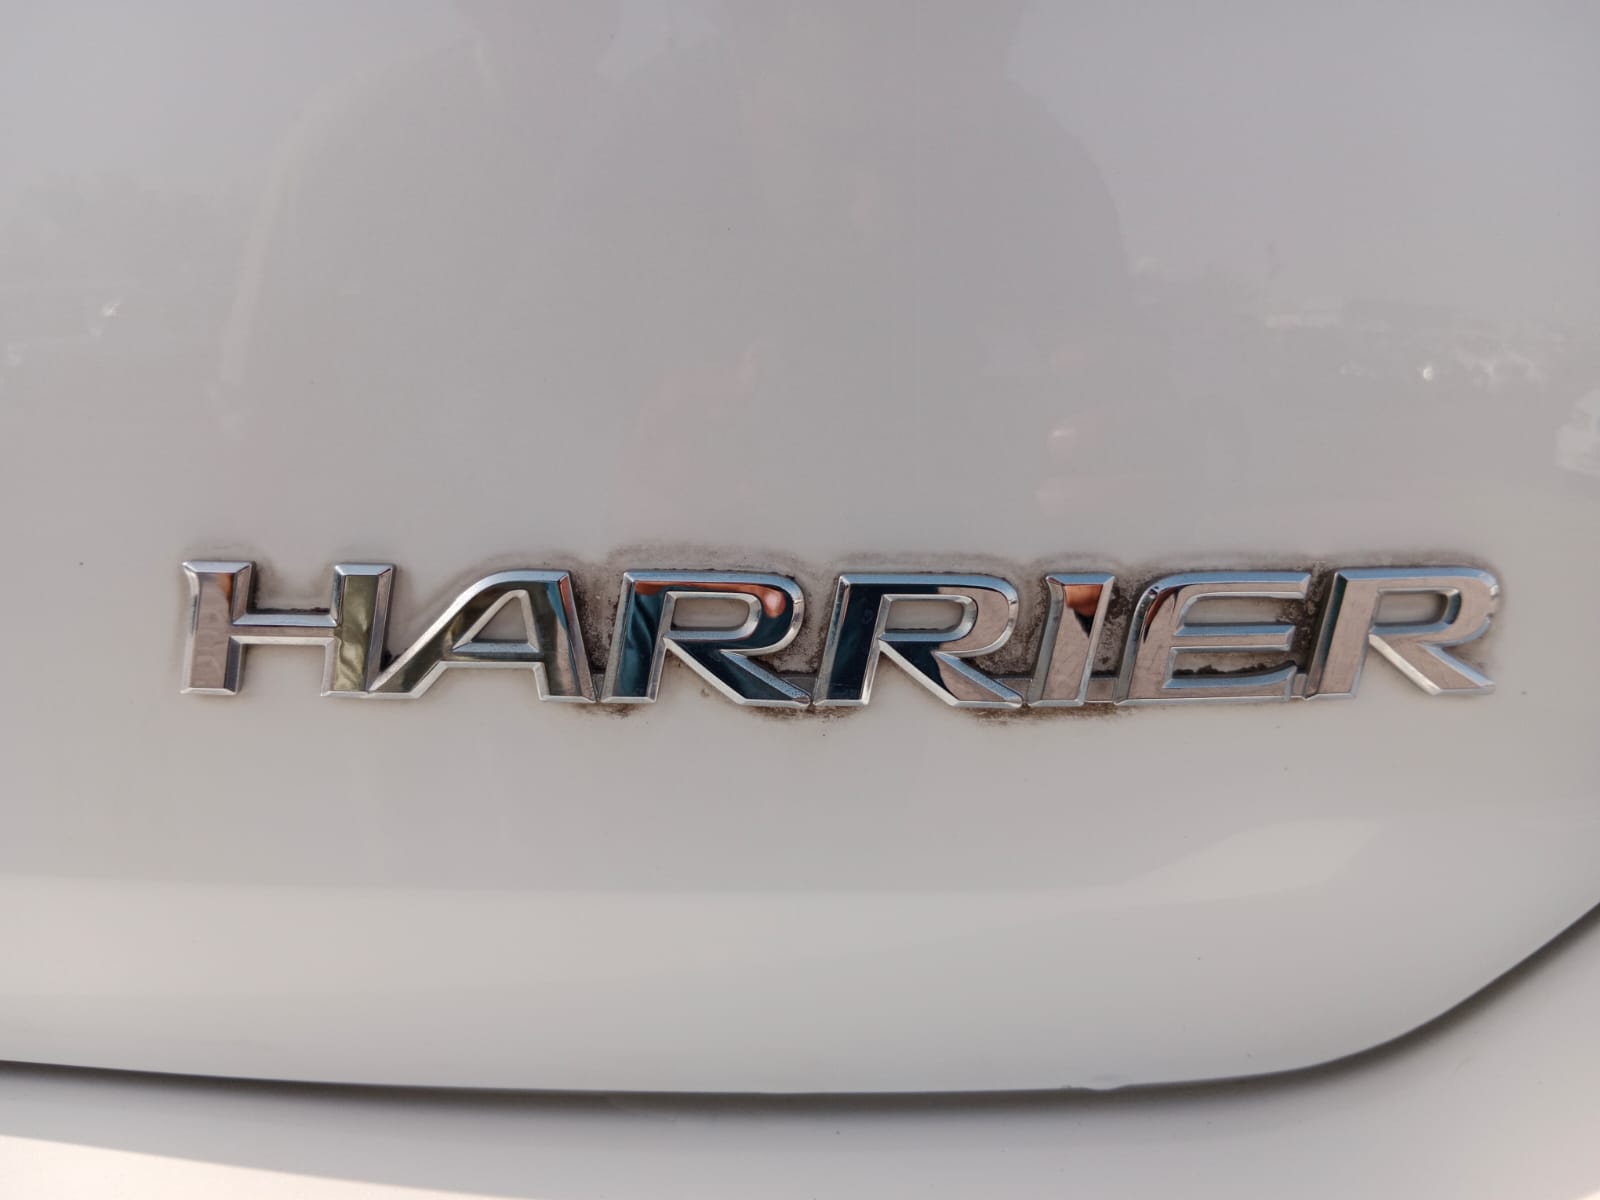 4568  TOYOTA HARRIER  2.4 A/T WHITE